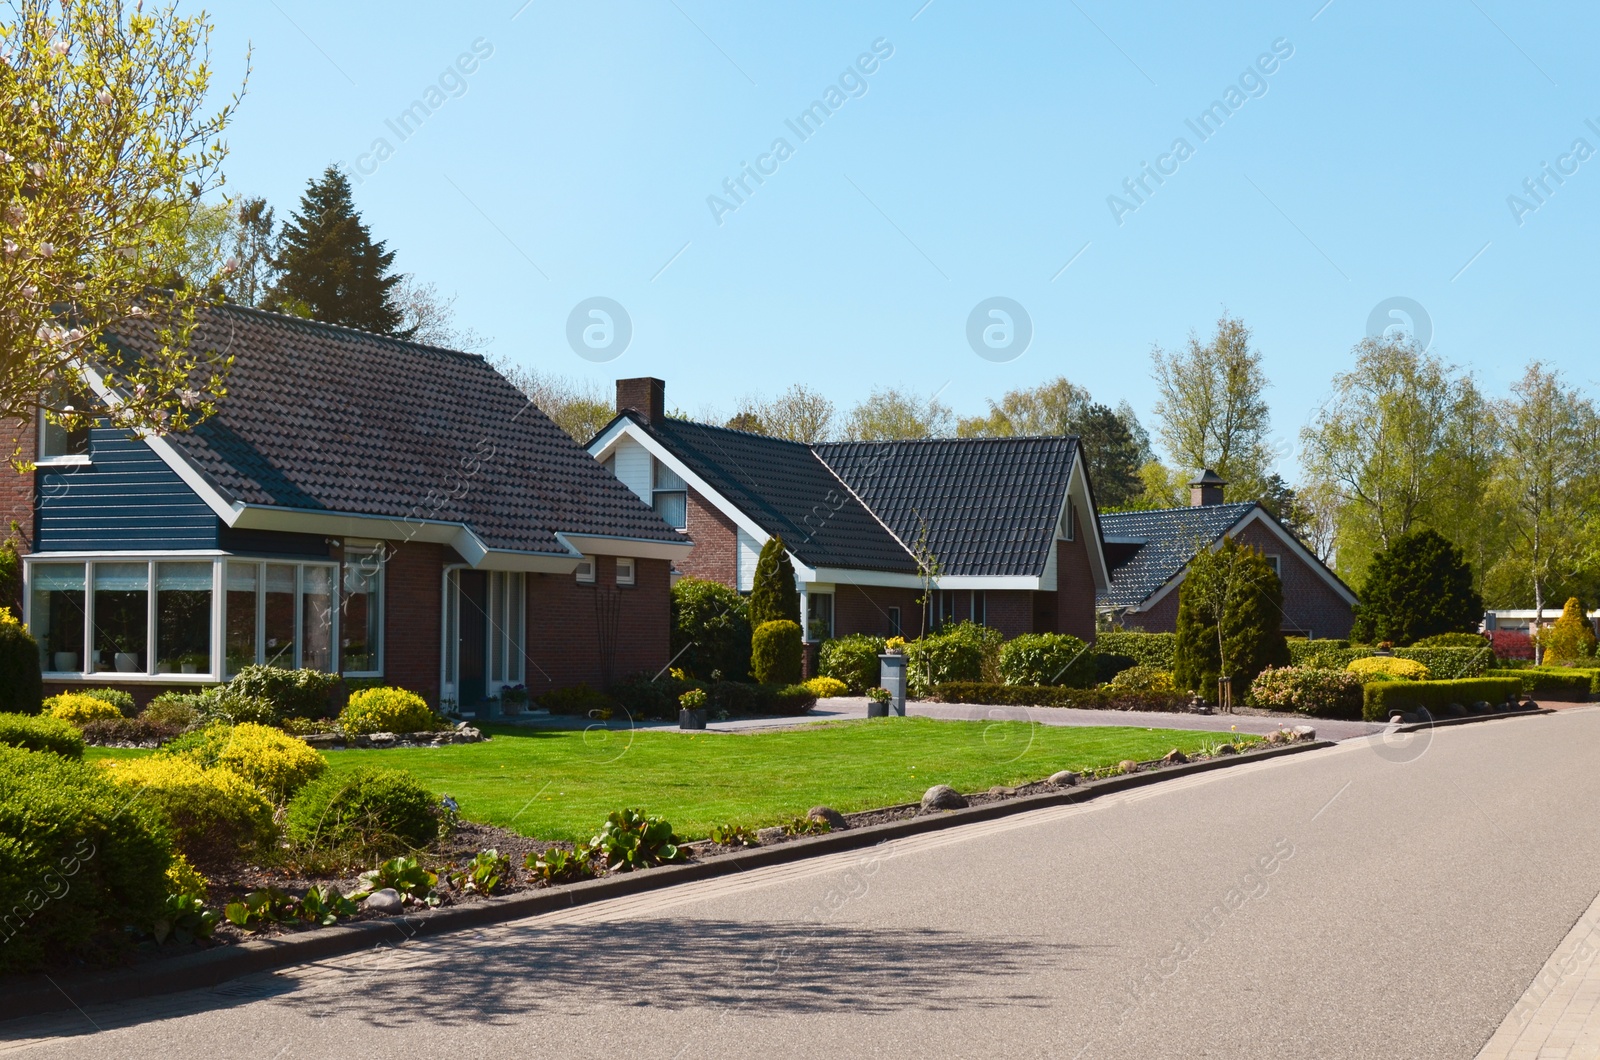 Photo of Picturesque view of cozy suburban street on sunny day